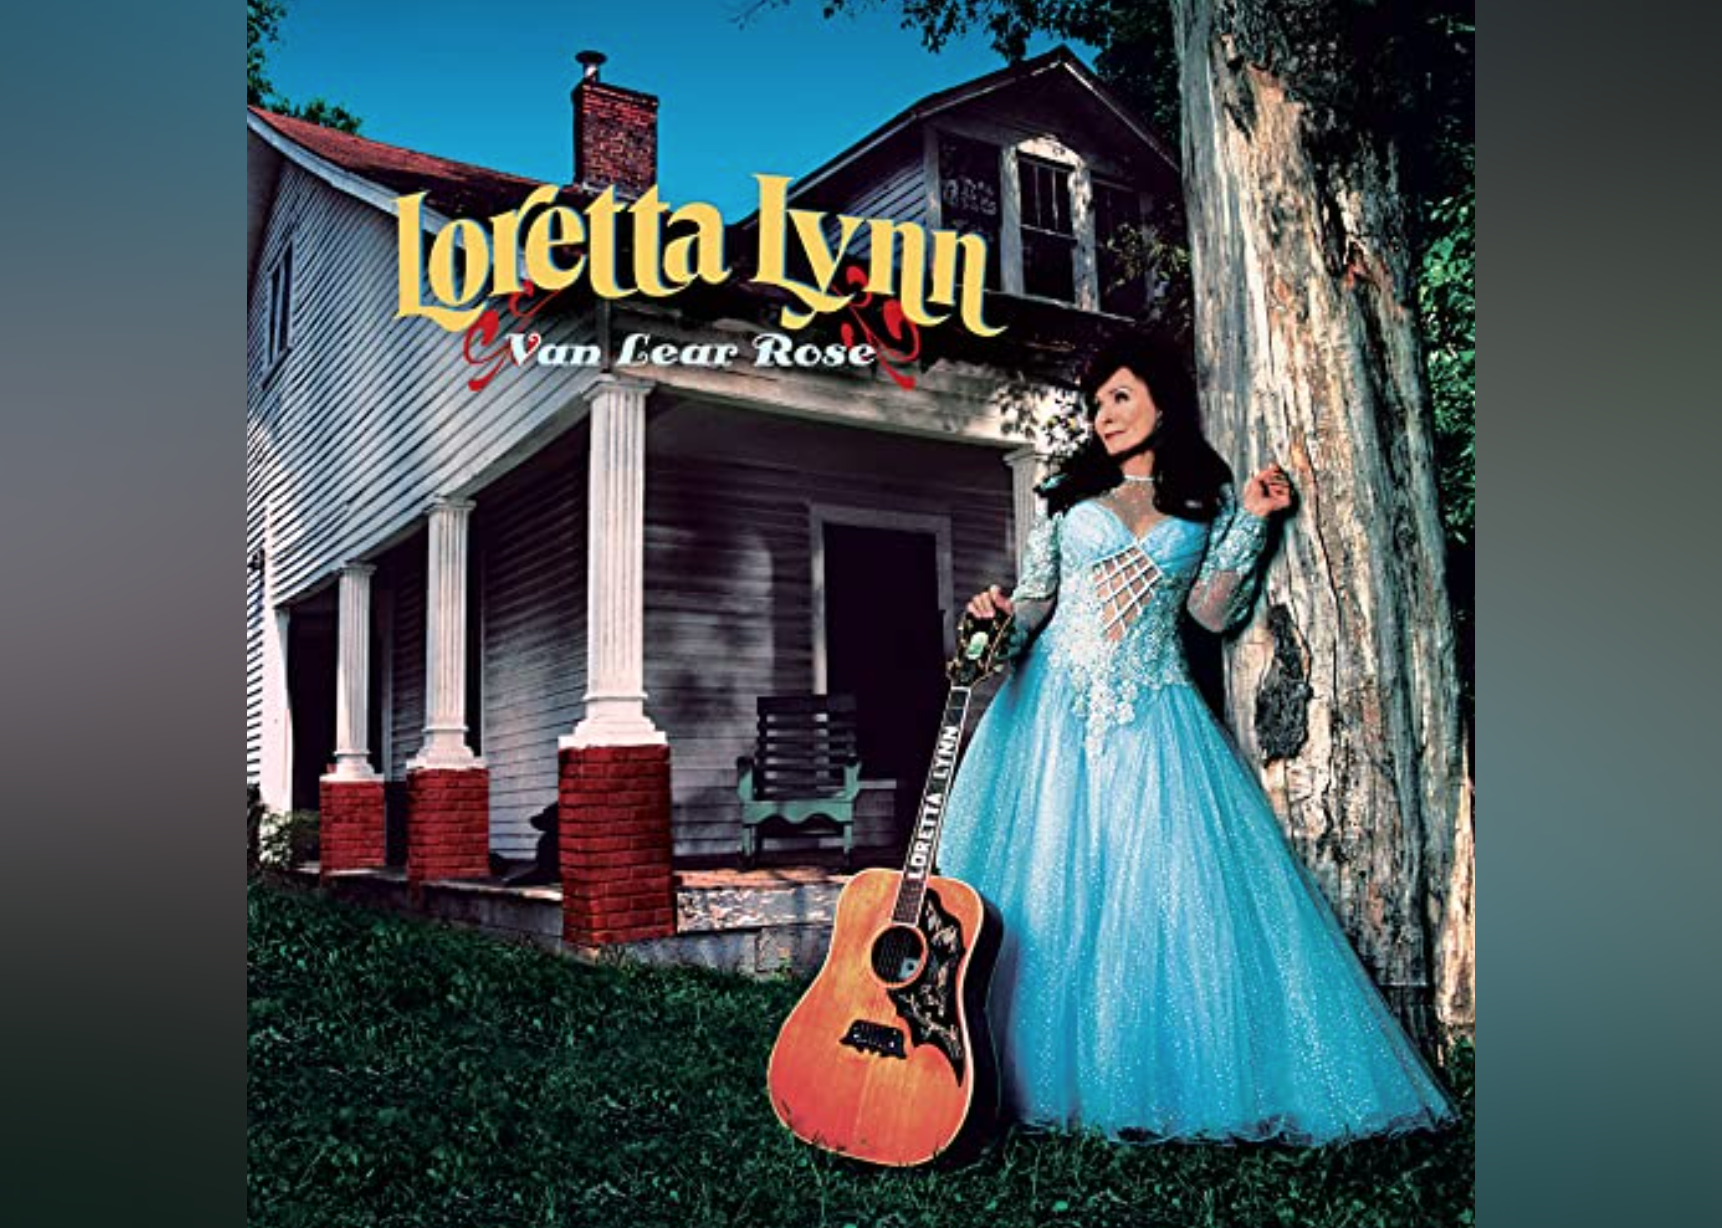 Loretta Lynn in a blue gown leaning on a tree in front of a house with a guitar leaning against her side.